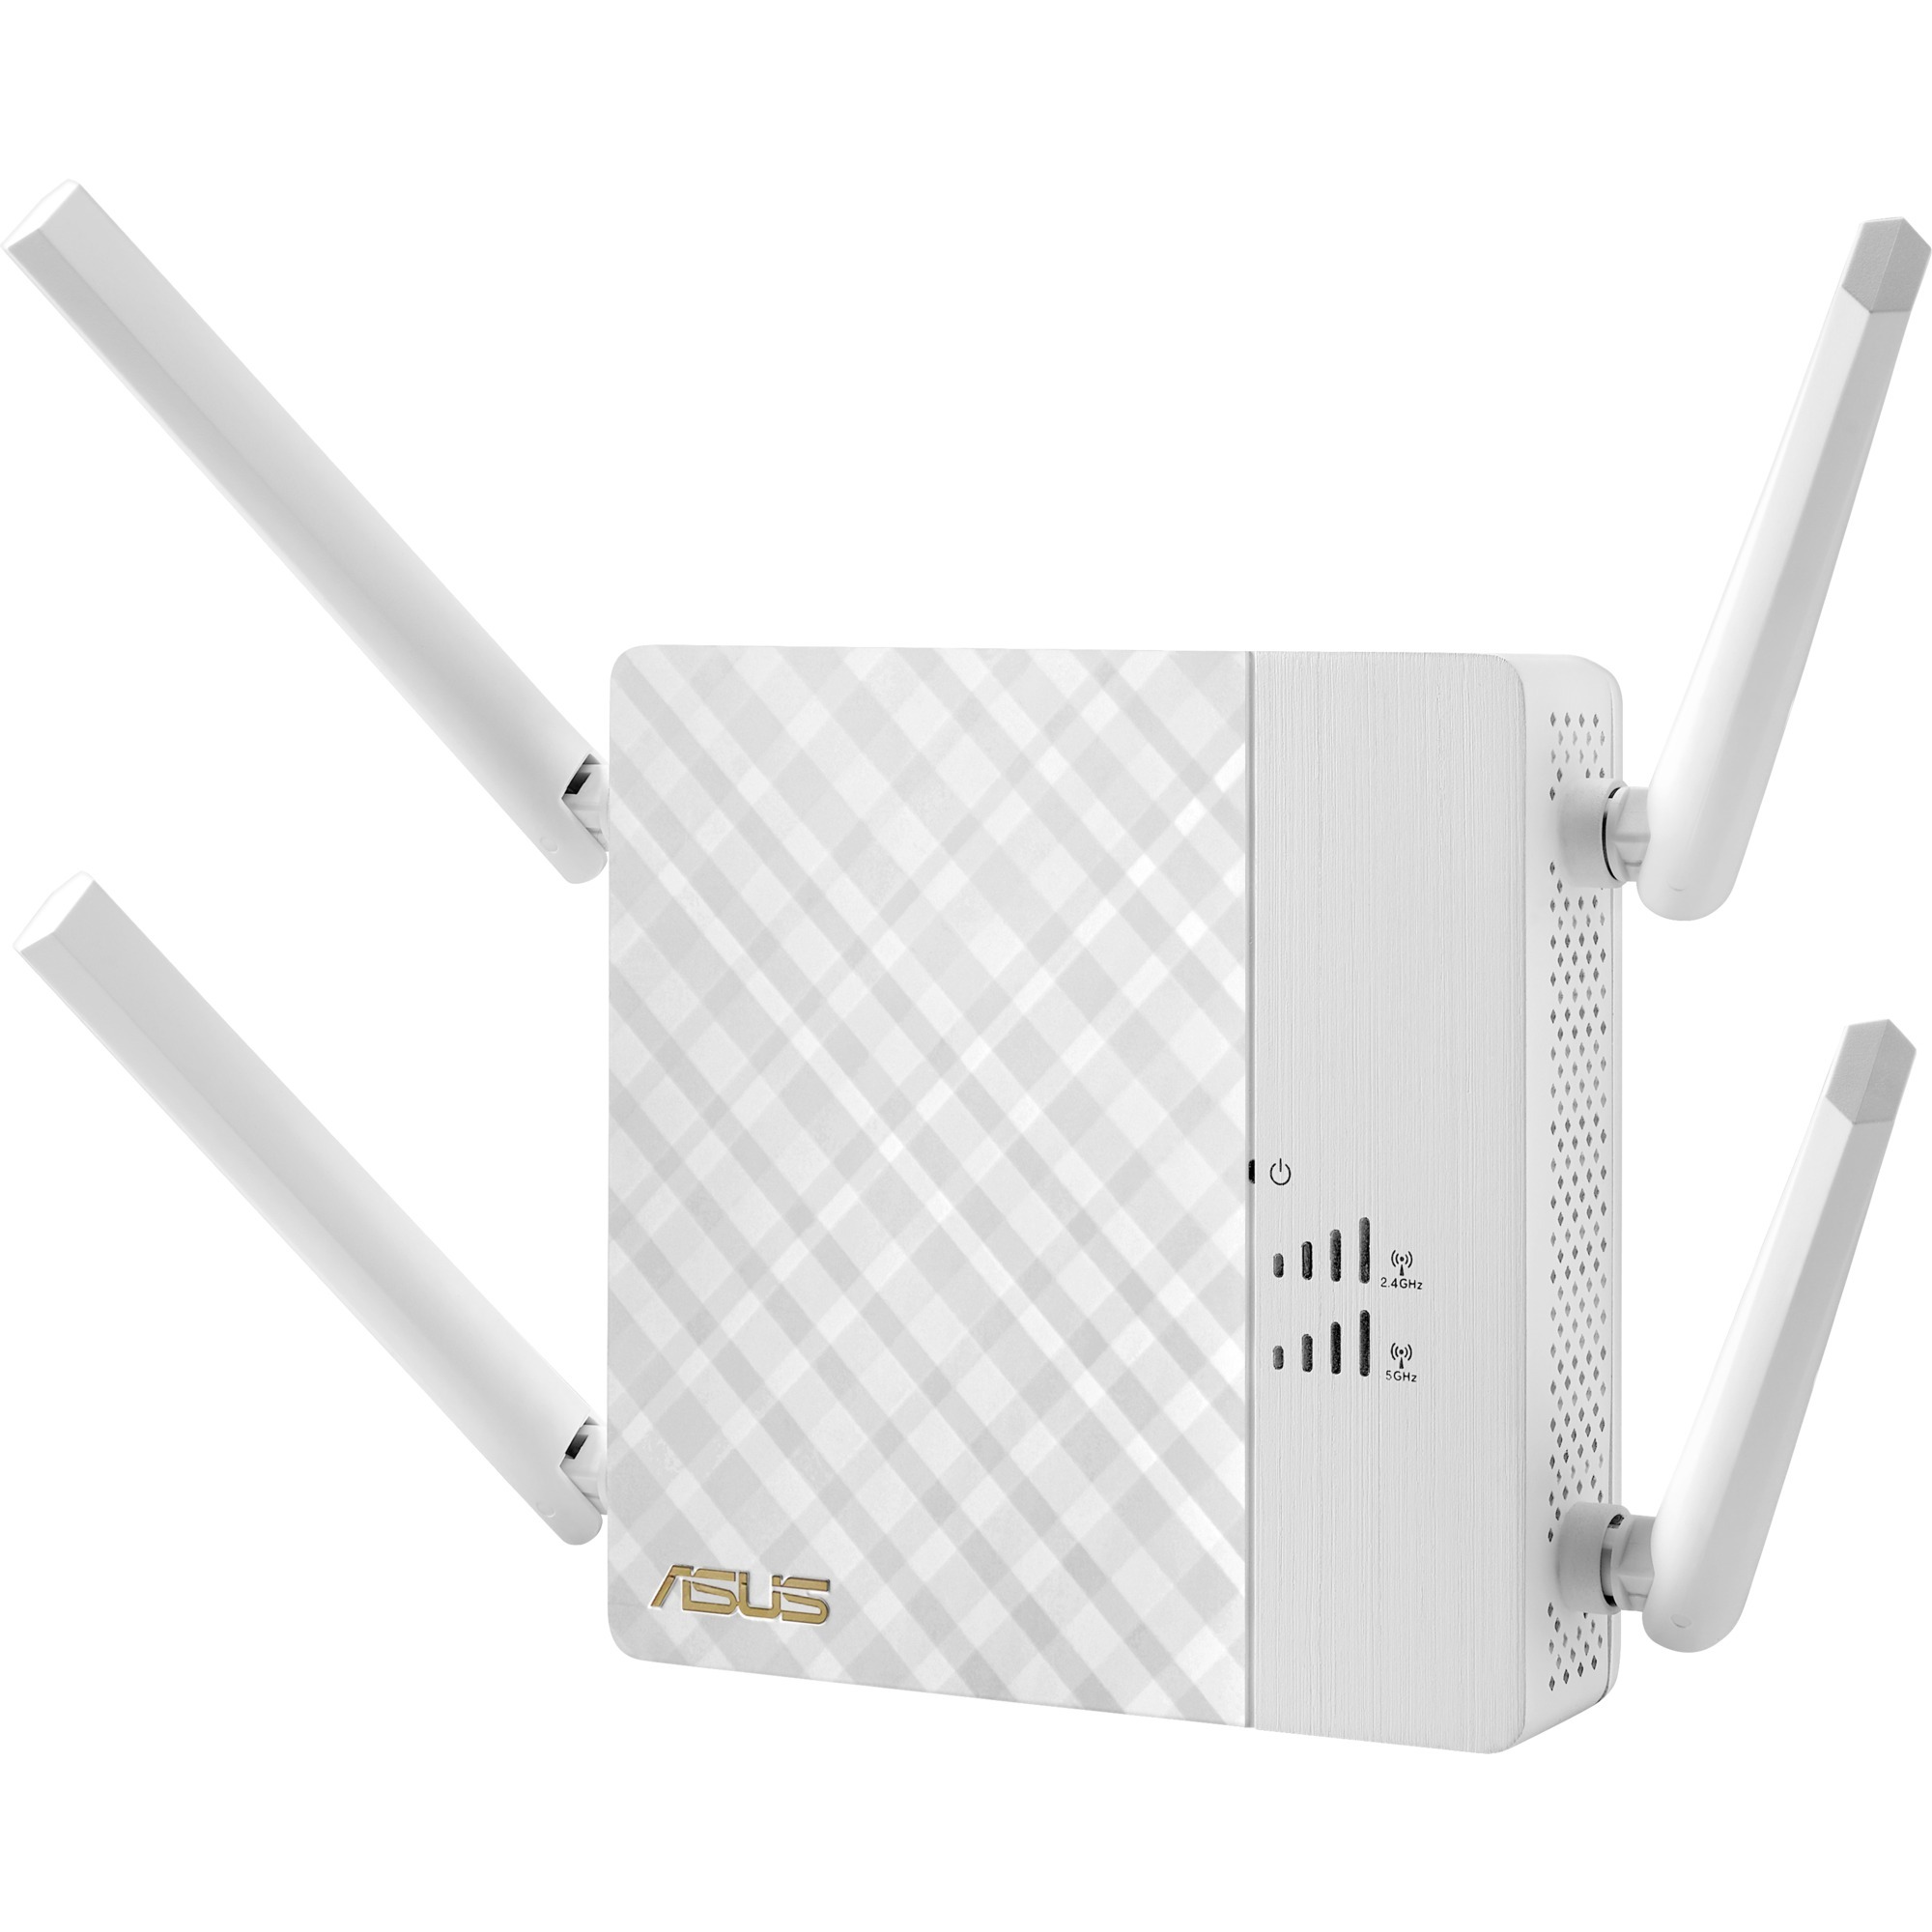 RP-AC87 2534 Mbit/s Network repeater Bia?y, Punkt dost?pu